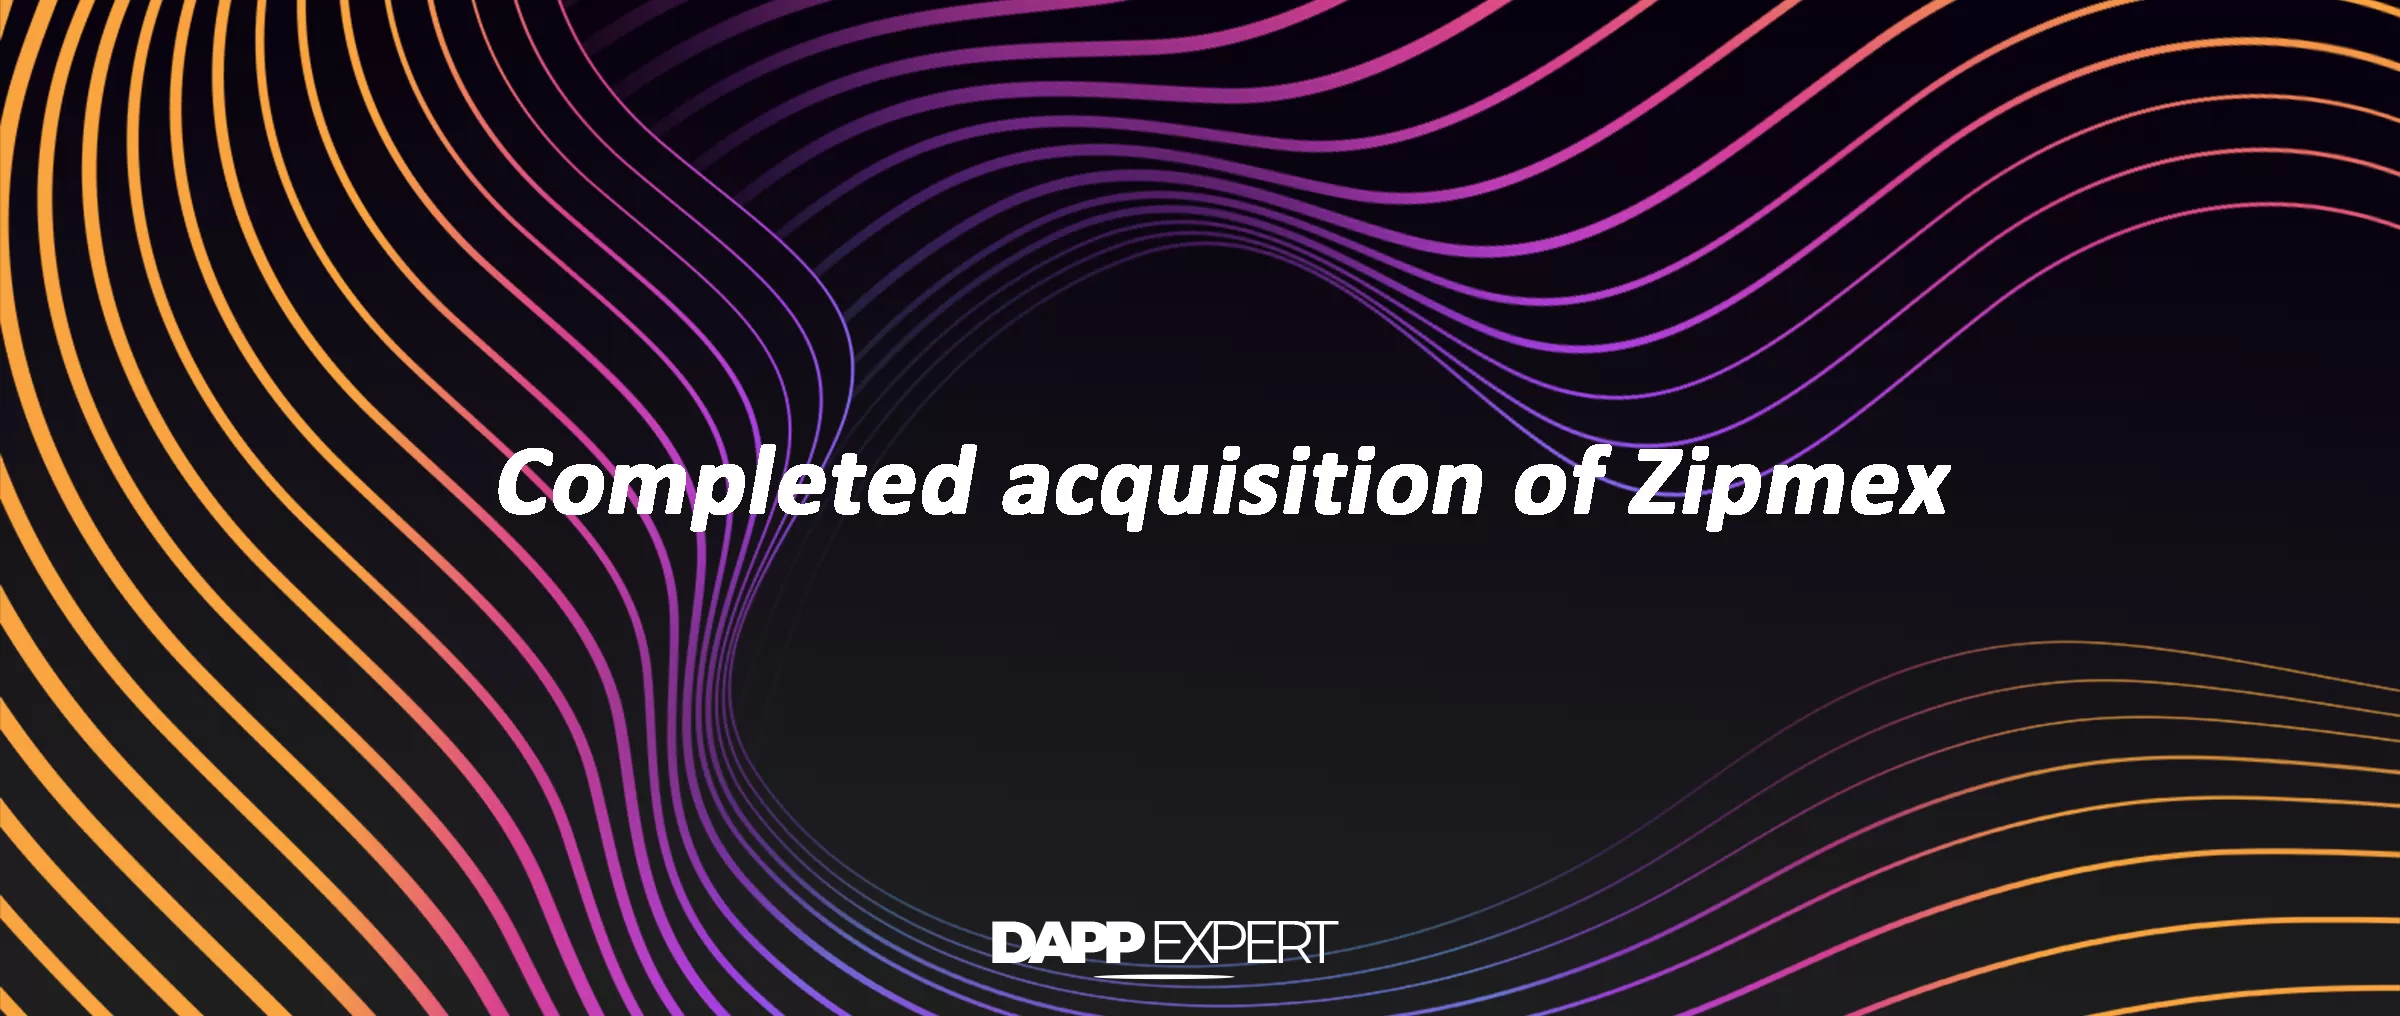 Completed acquisition of Zipmex